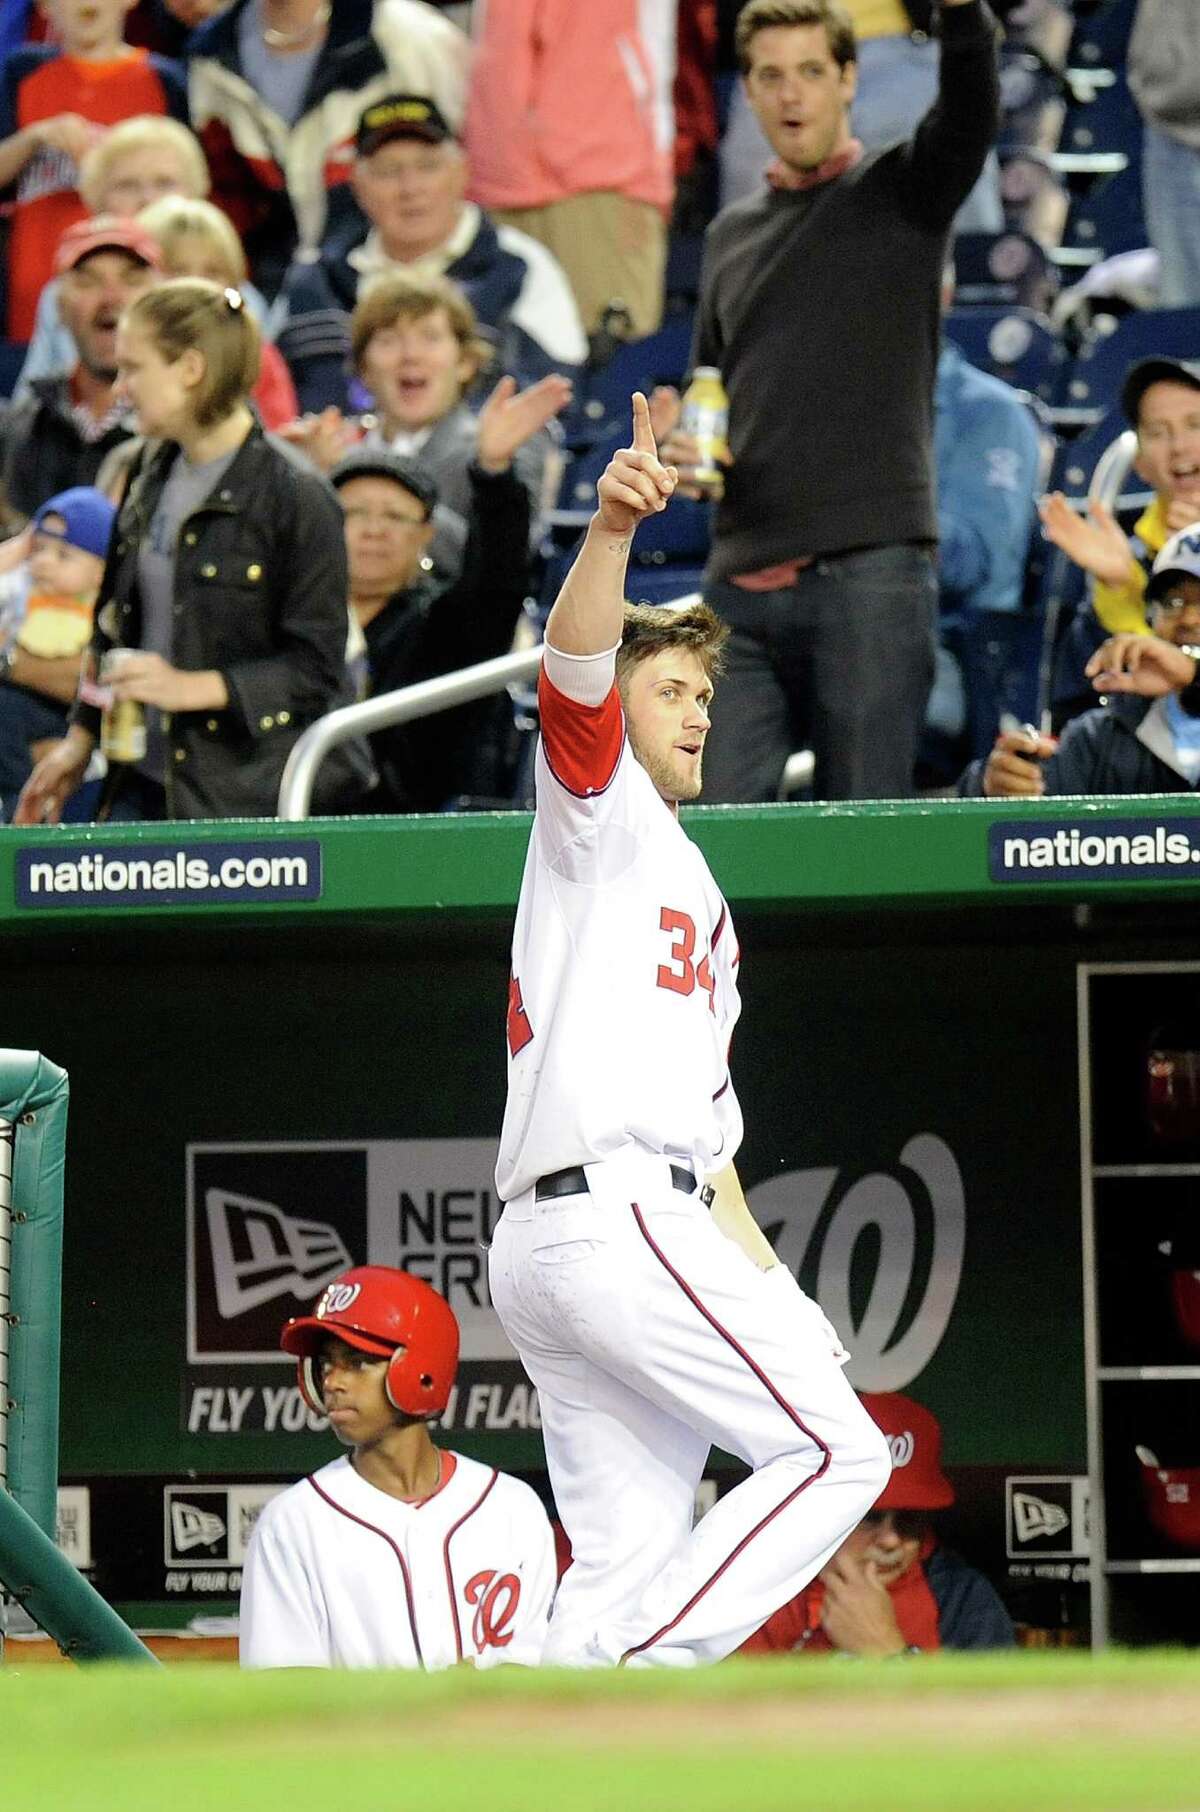 Nationals rookie Bryce Harper takes a curtain call for fans after hitting his first career home run in the third inning of Monday's game against San Diego.